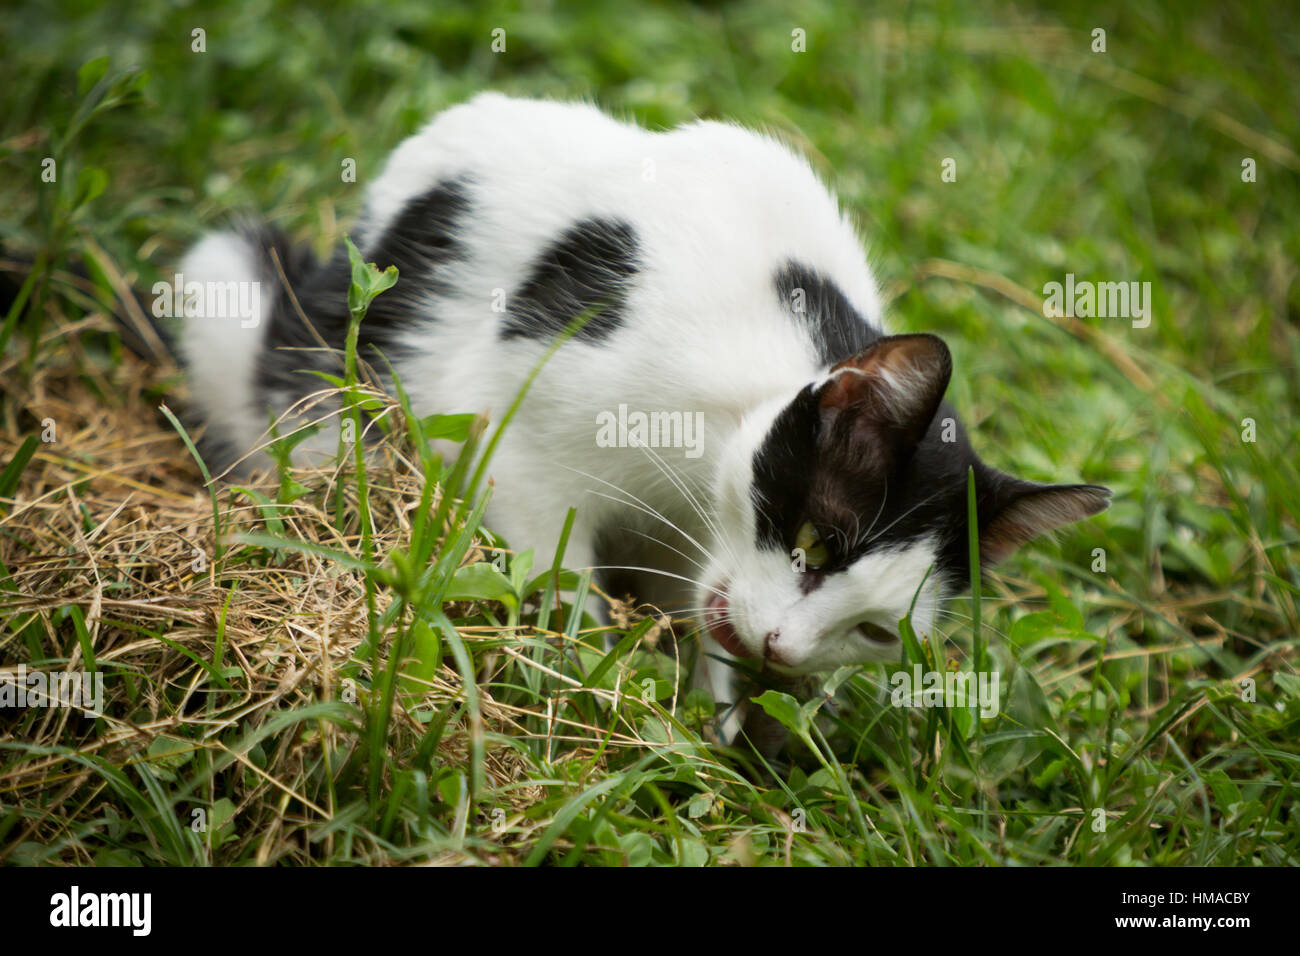 A street cat hunts and eats an earthworm from wet soil in the backyard during humid day, Asuncion, Paraguay Stock Photo